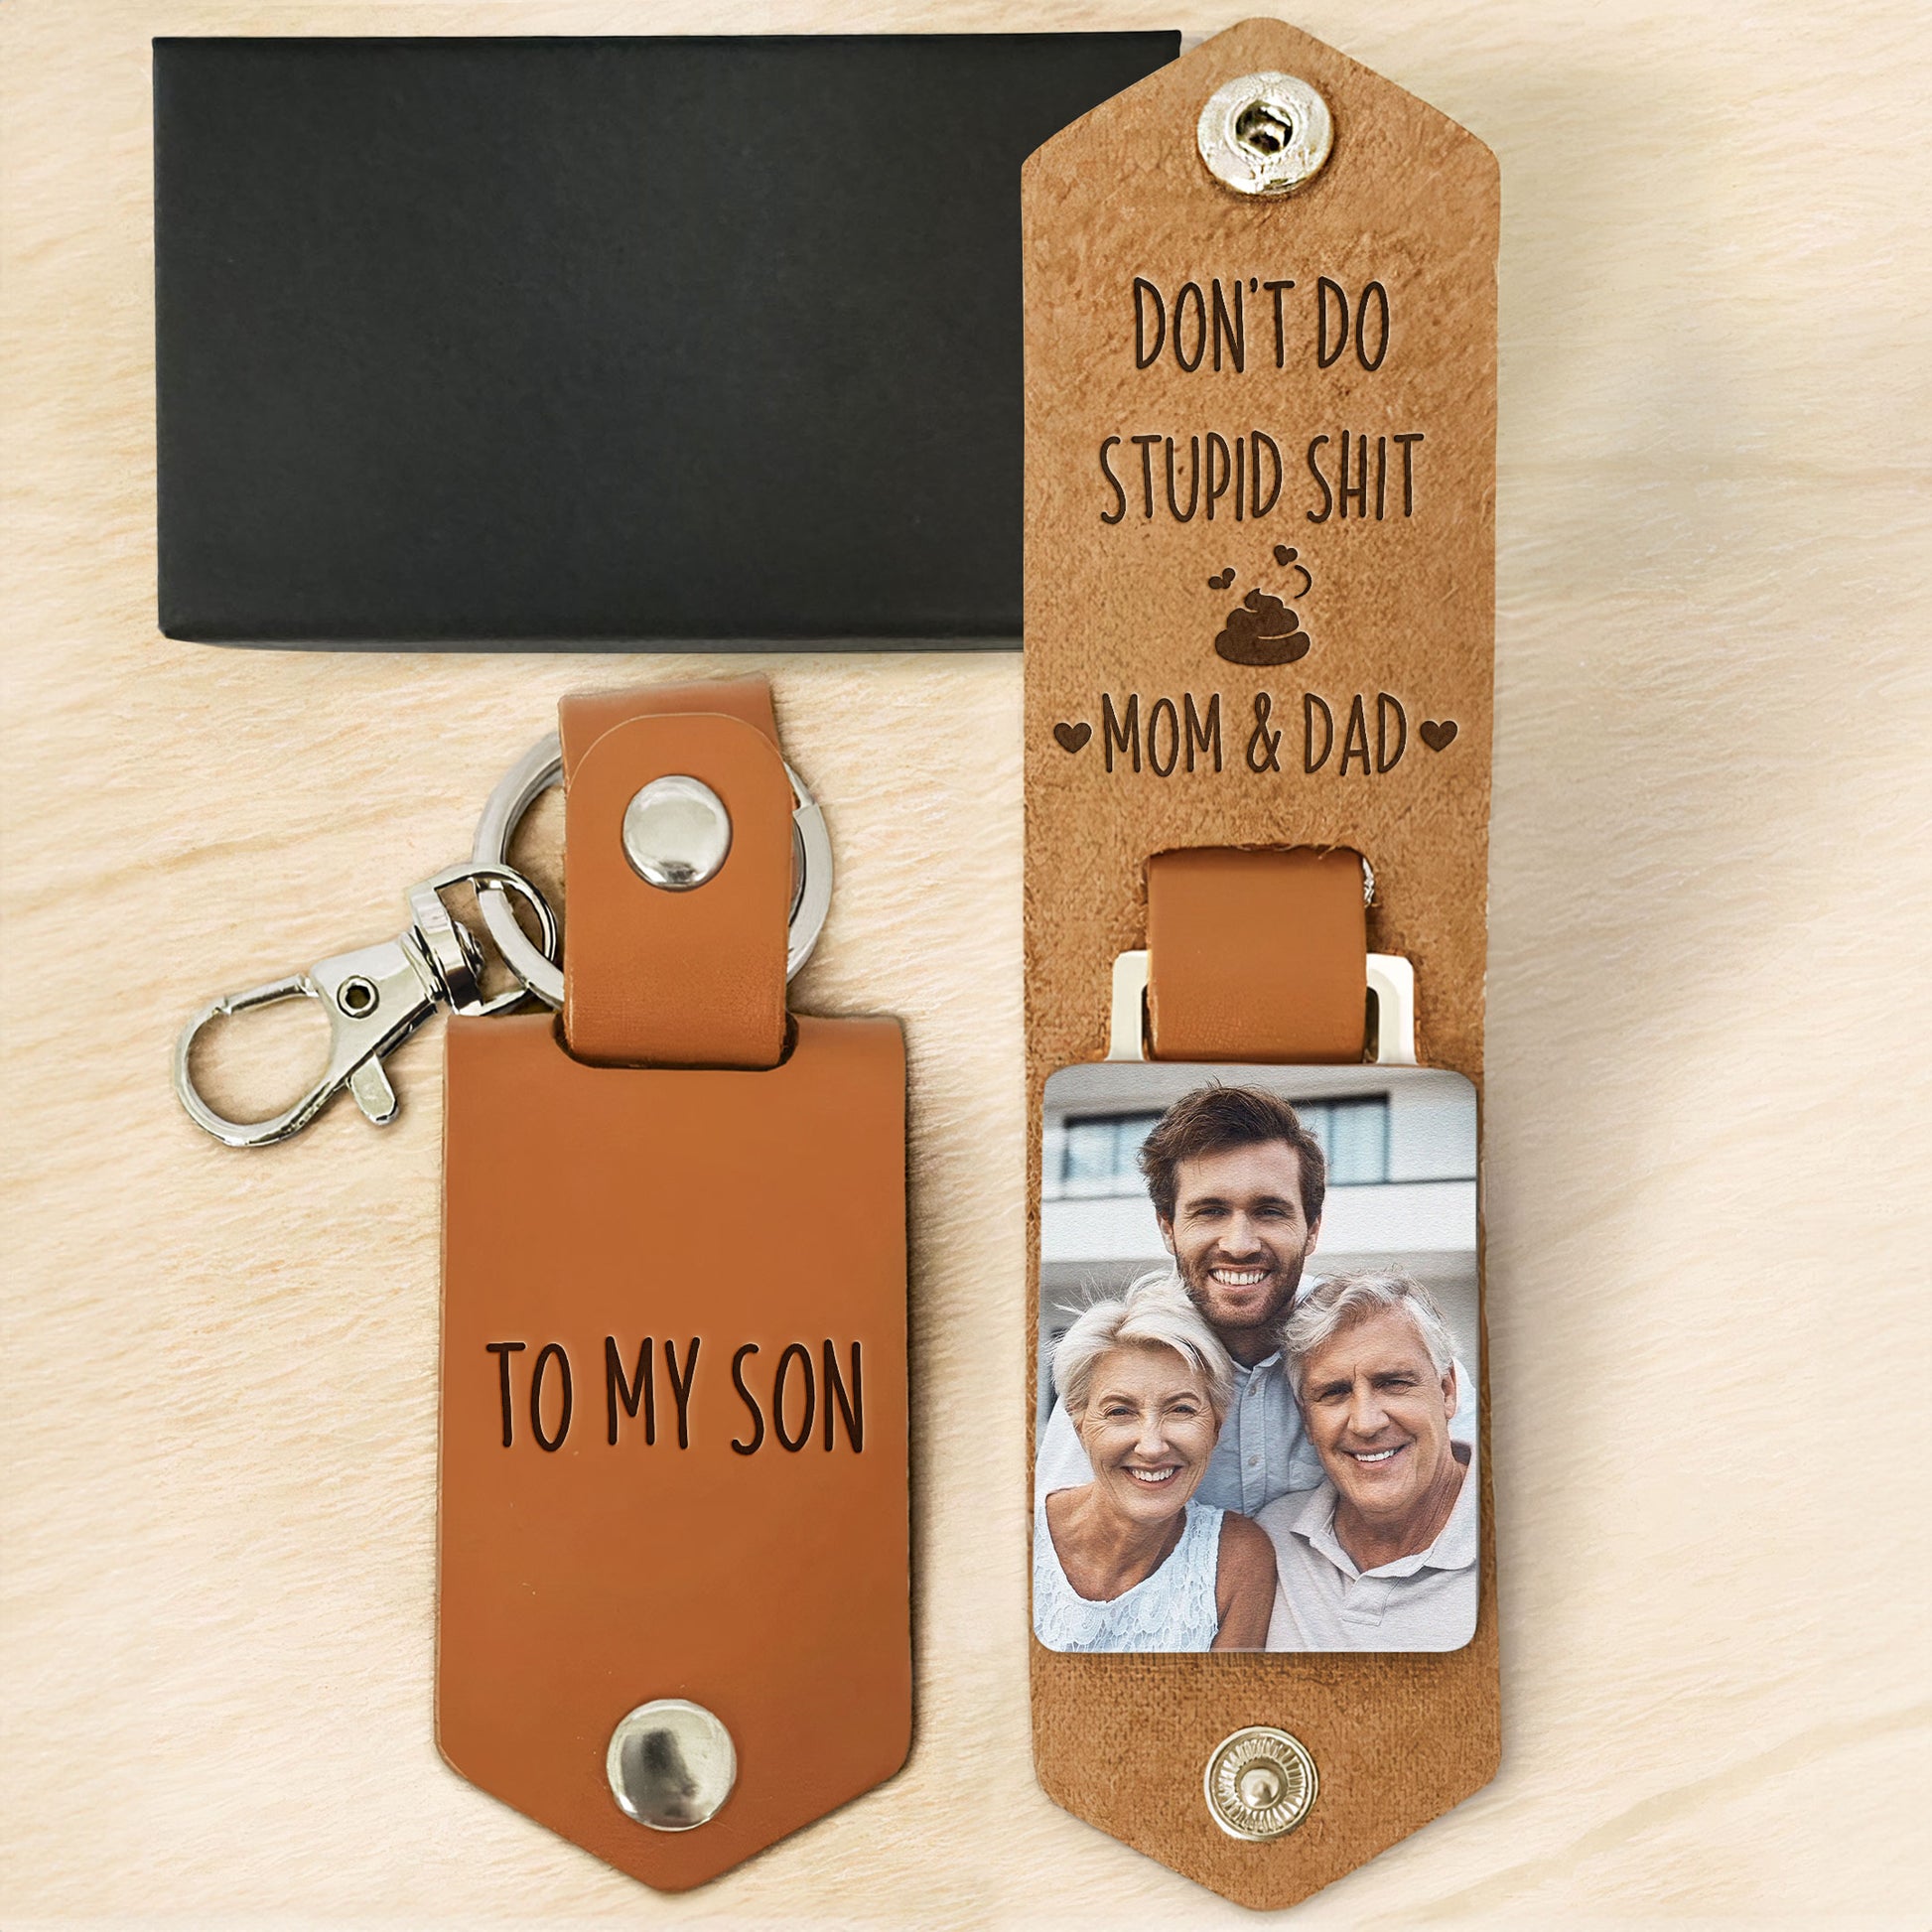 https://macorner.co/cdn/shop/files/Don_T-Do-Stupid-Shit-For-Kids_-Son_-Daughter-Personalized-Leather-Photo-Keychain_3.jpg?v=1704442047&width=1946